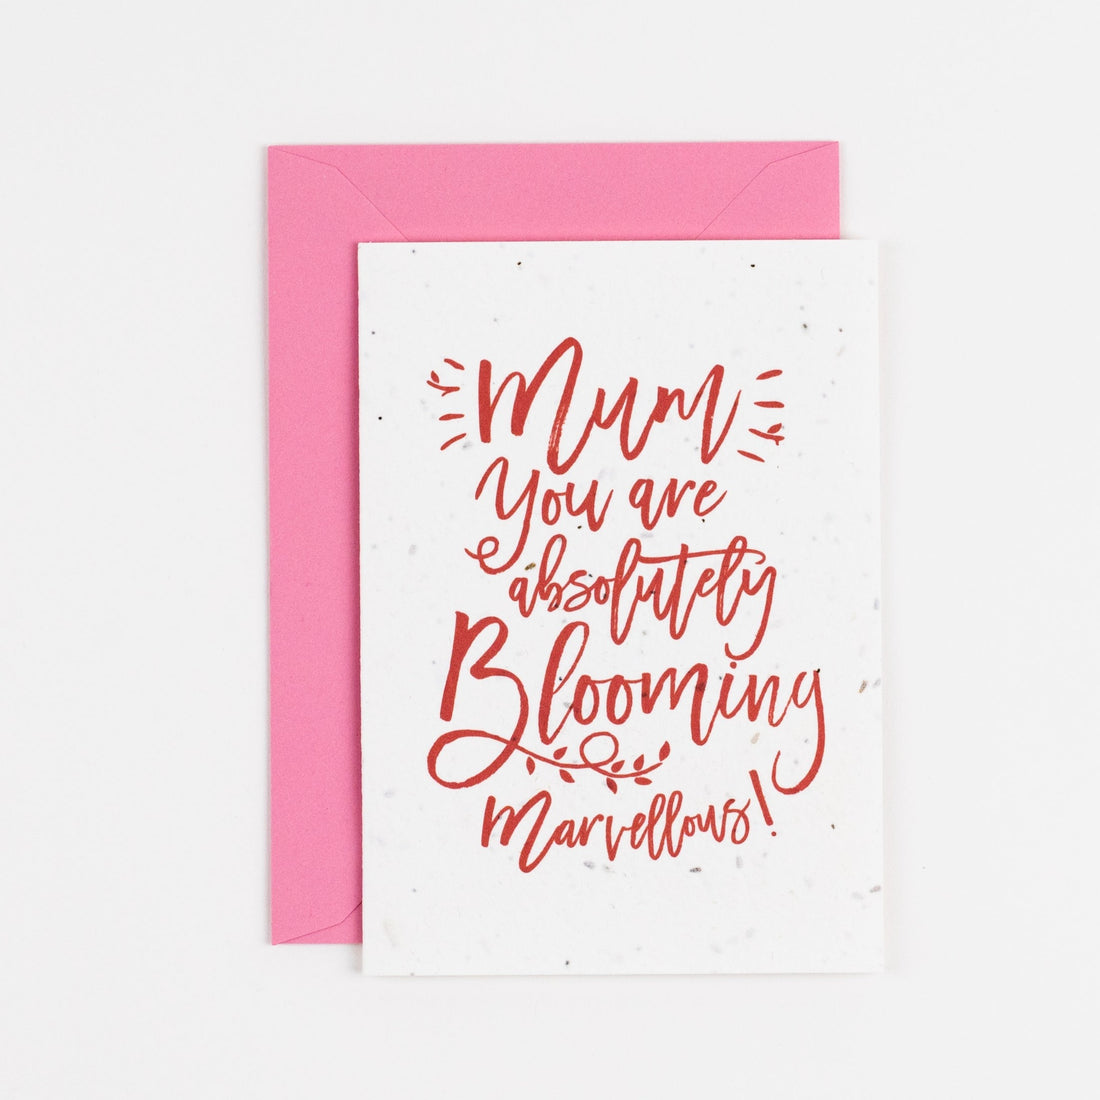 Mum you are absolutely blooming marvellous! plantable card